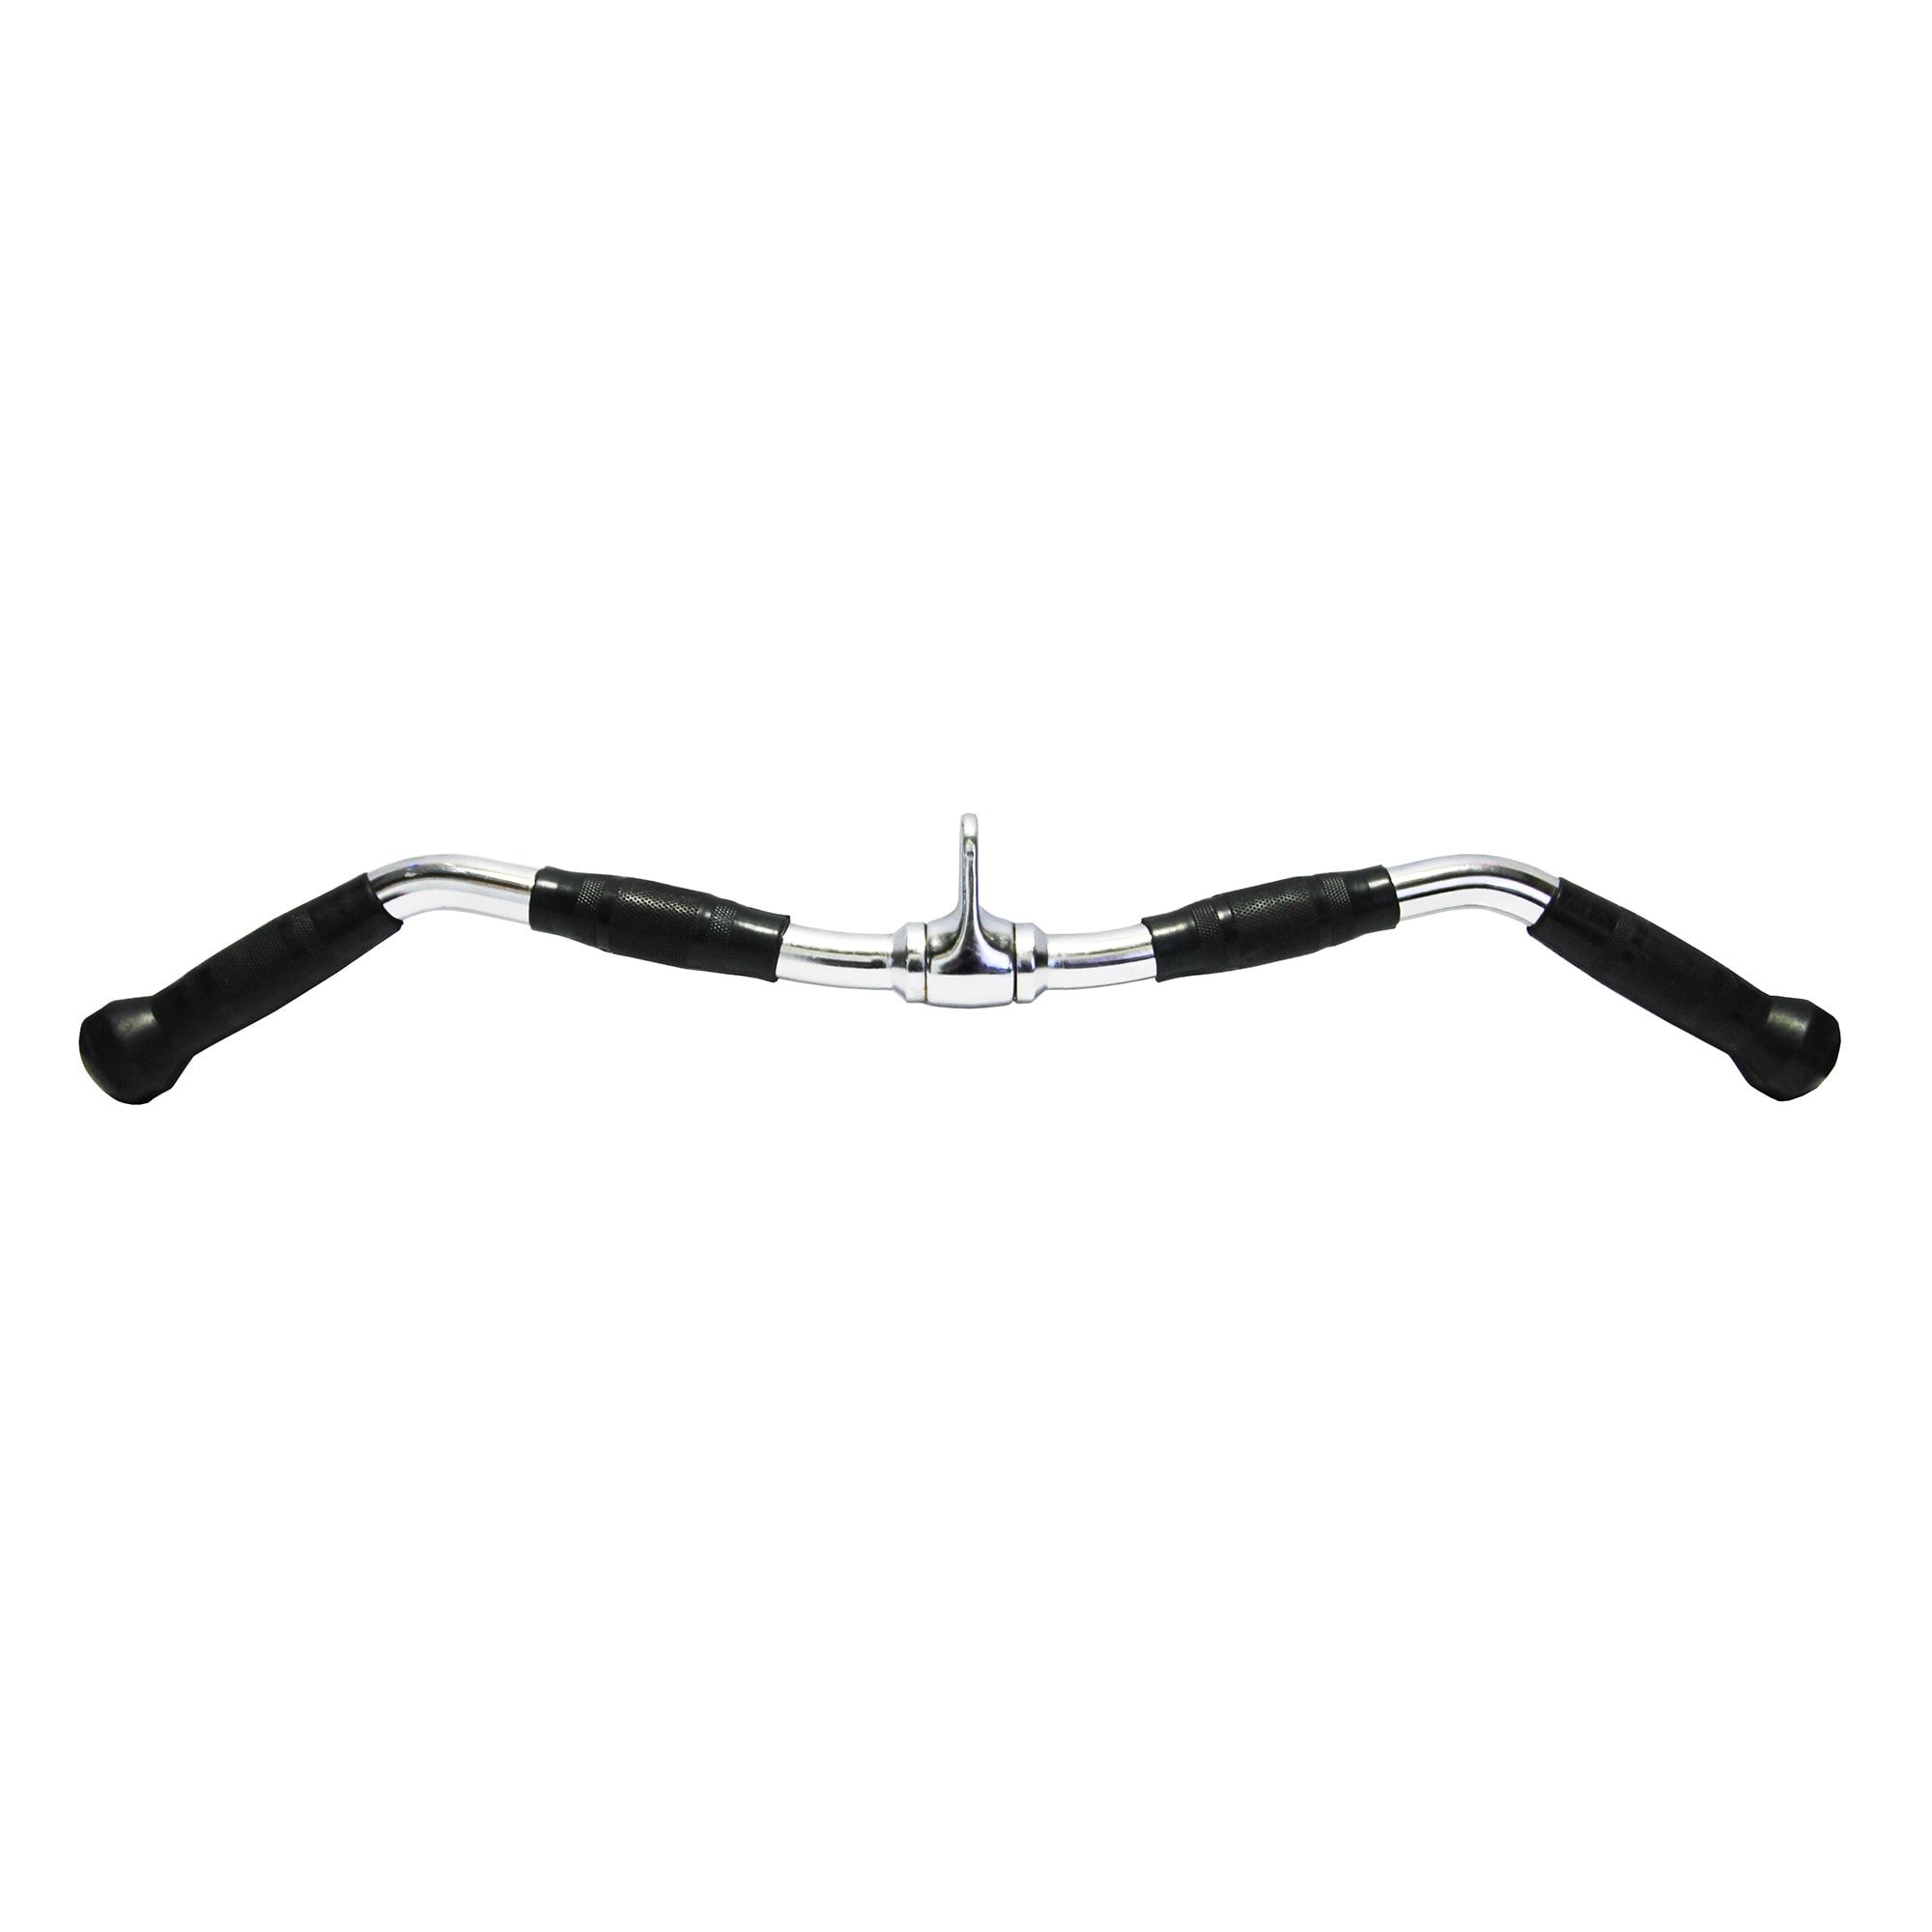 Multiple Options Available Valor Fitness MB LAT Pull Bar Accessories with Rotating Swivels for Cable Machines